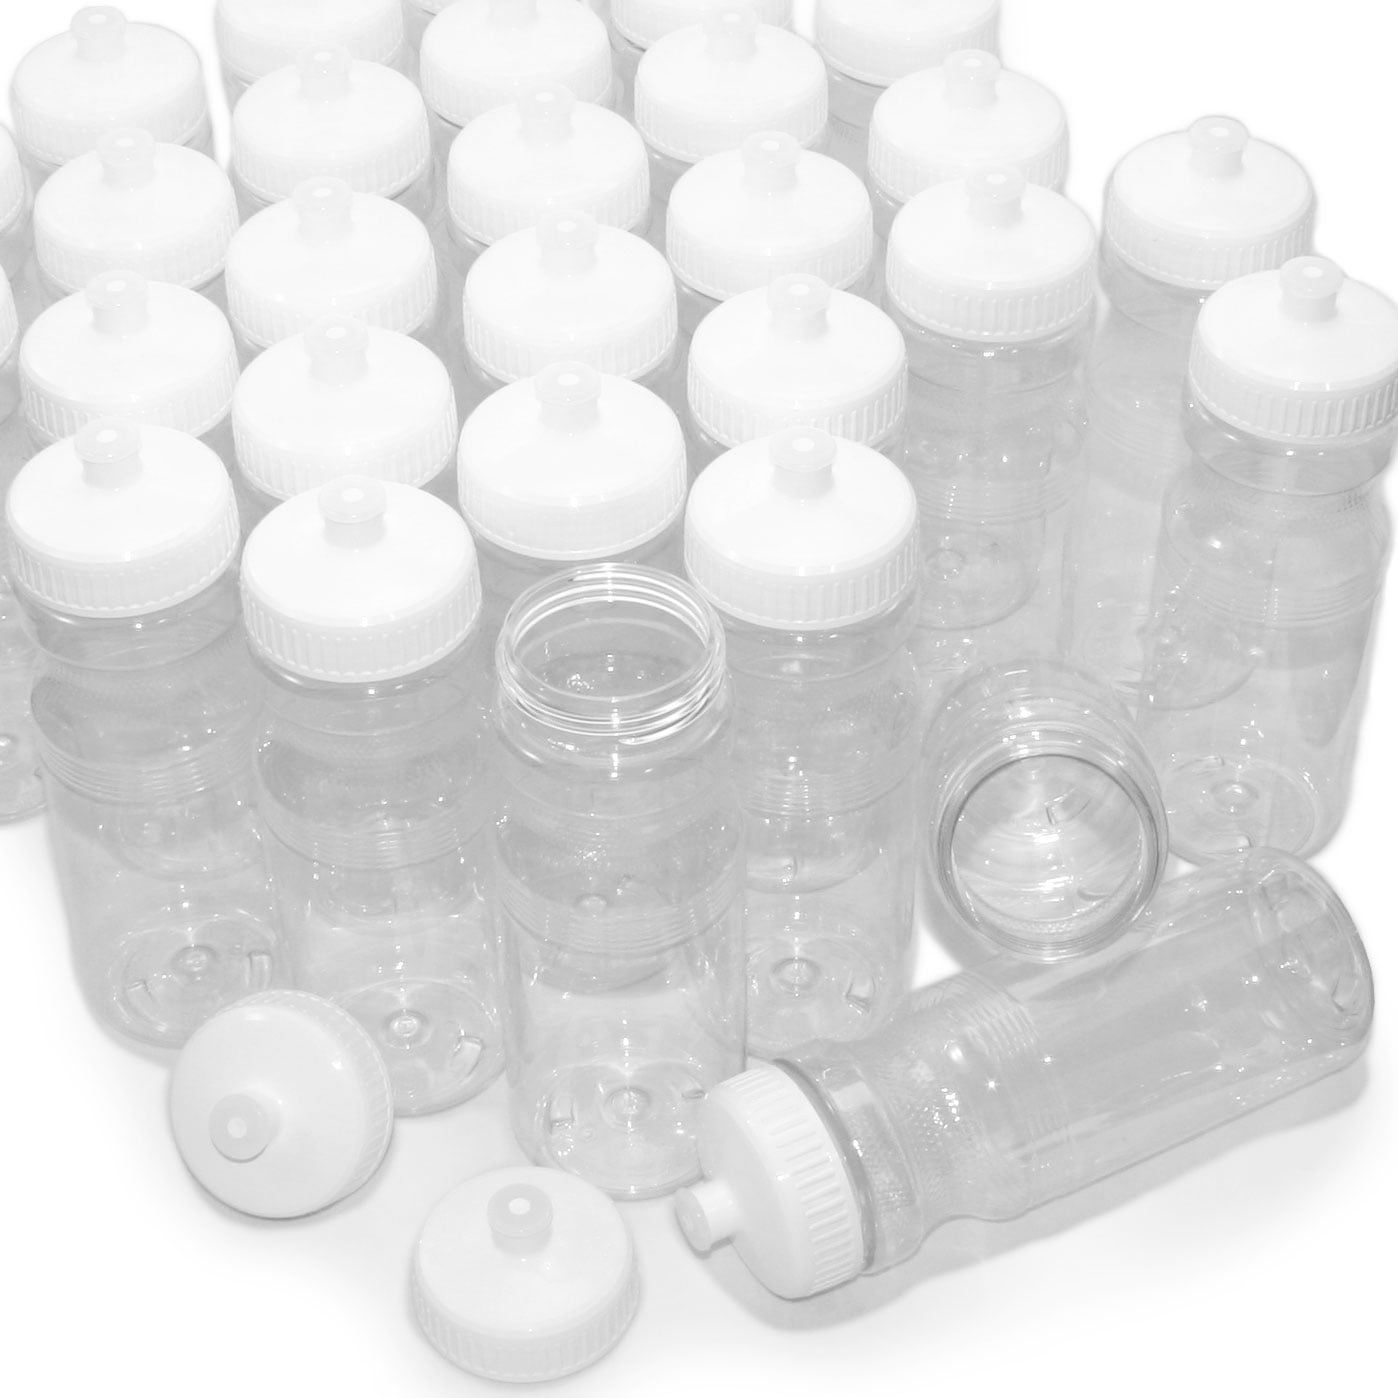 Rolling Sands BPA-Free 24 Ounce Clear with Orange Water Bottles, Bulk 30 Pack, Made in USA